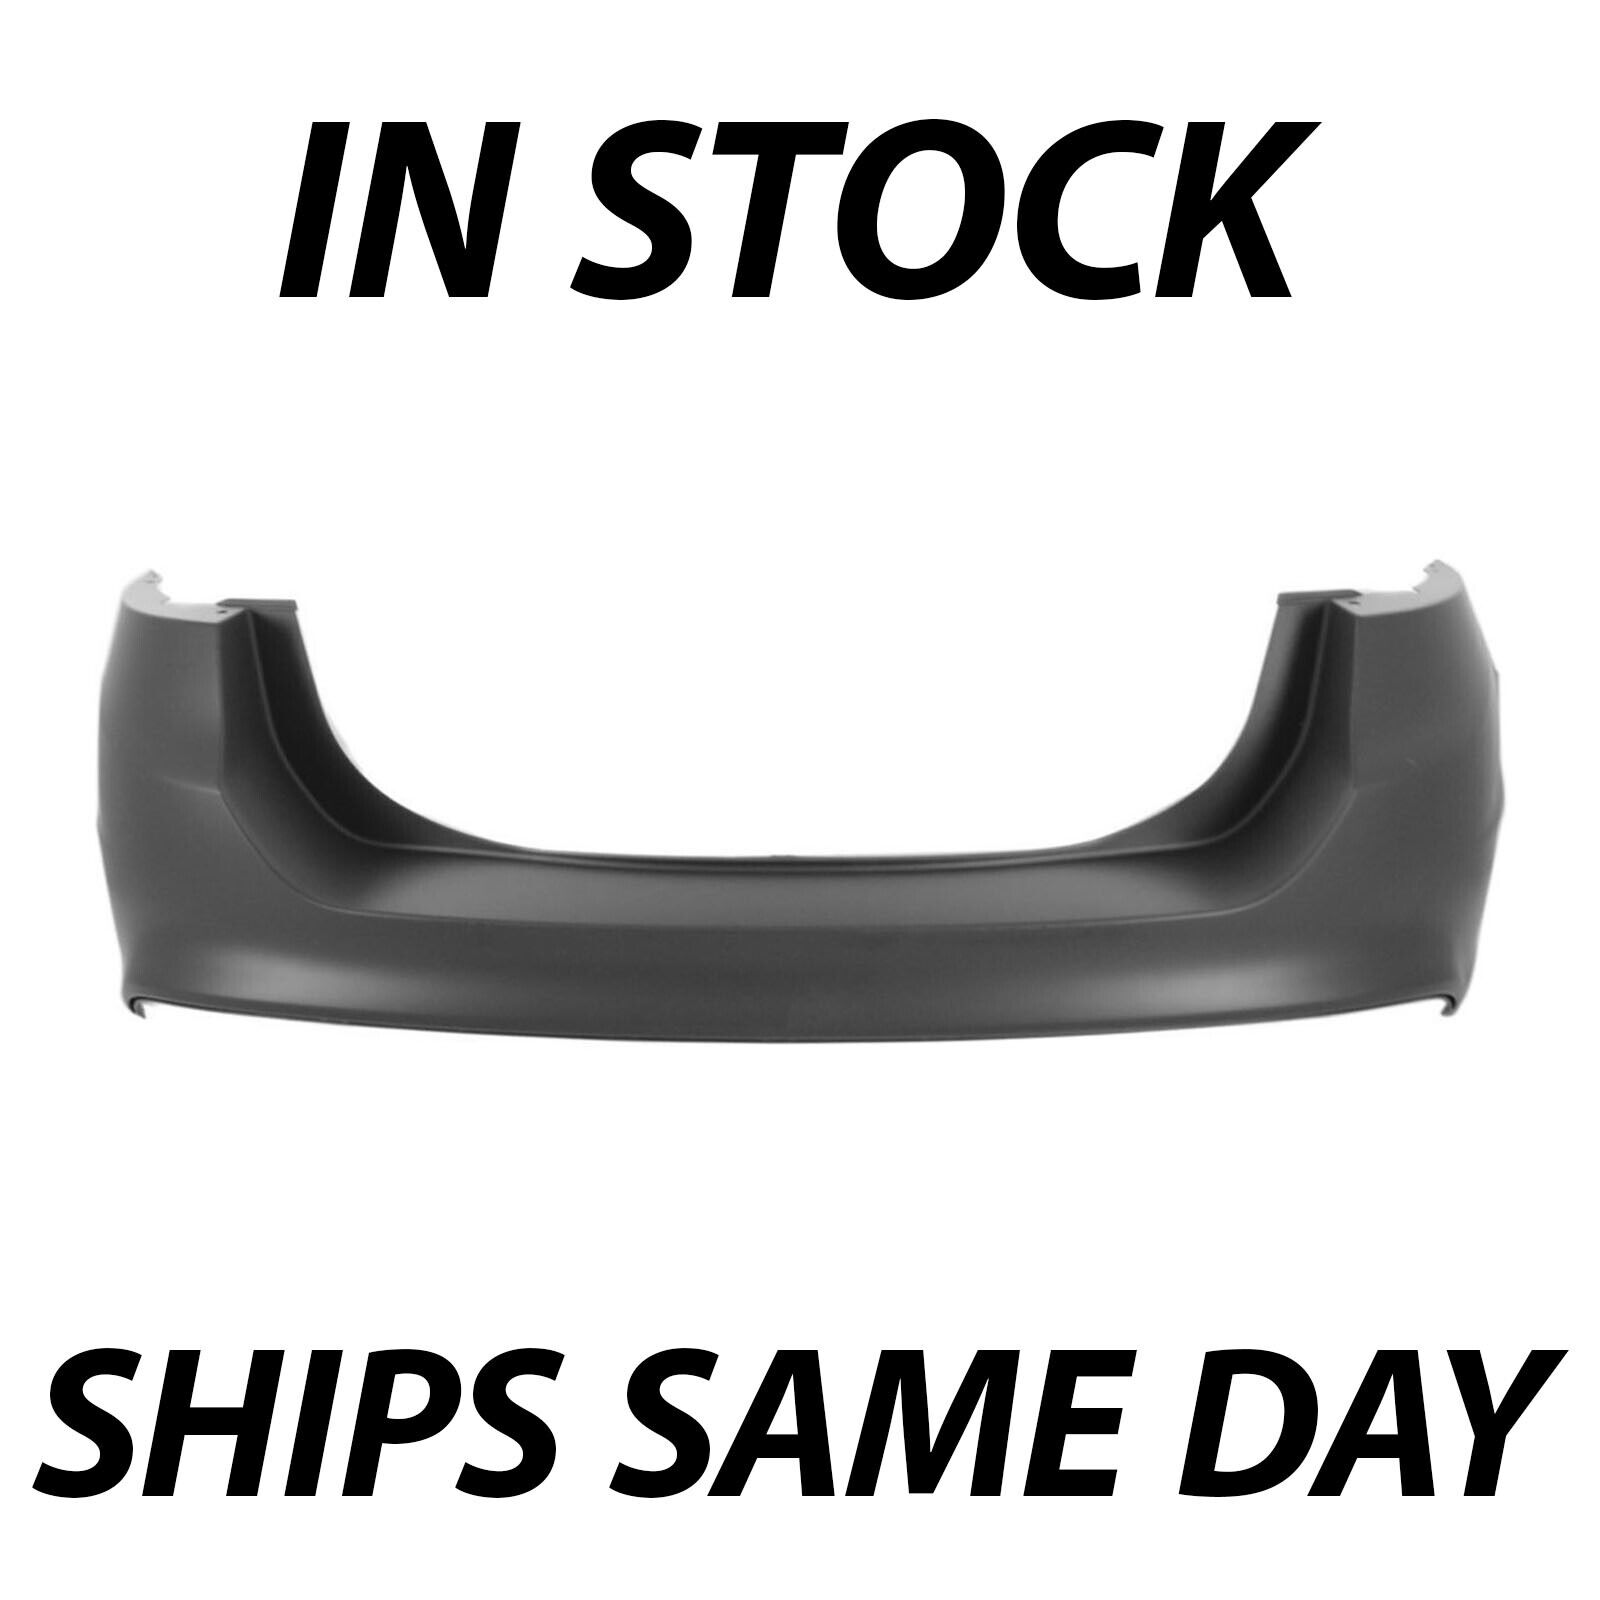 NEW Primered -- Rear Bumper Cover Replacement For 2013-2018 Ford Fusion w/o Park